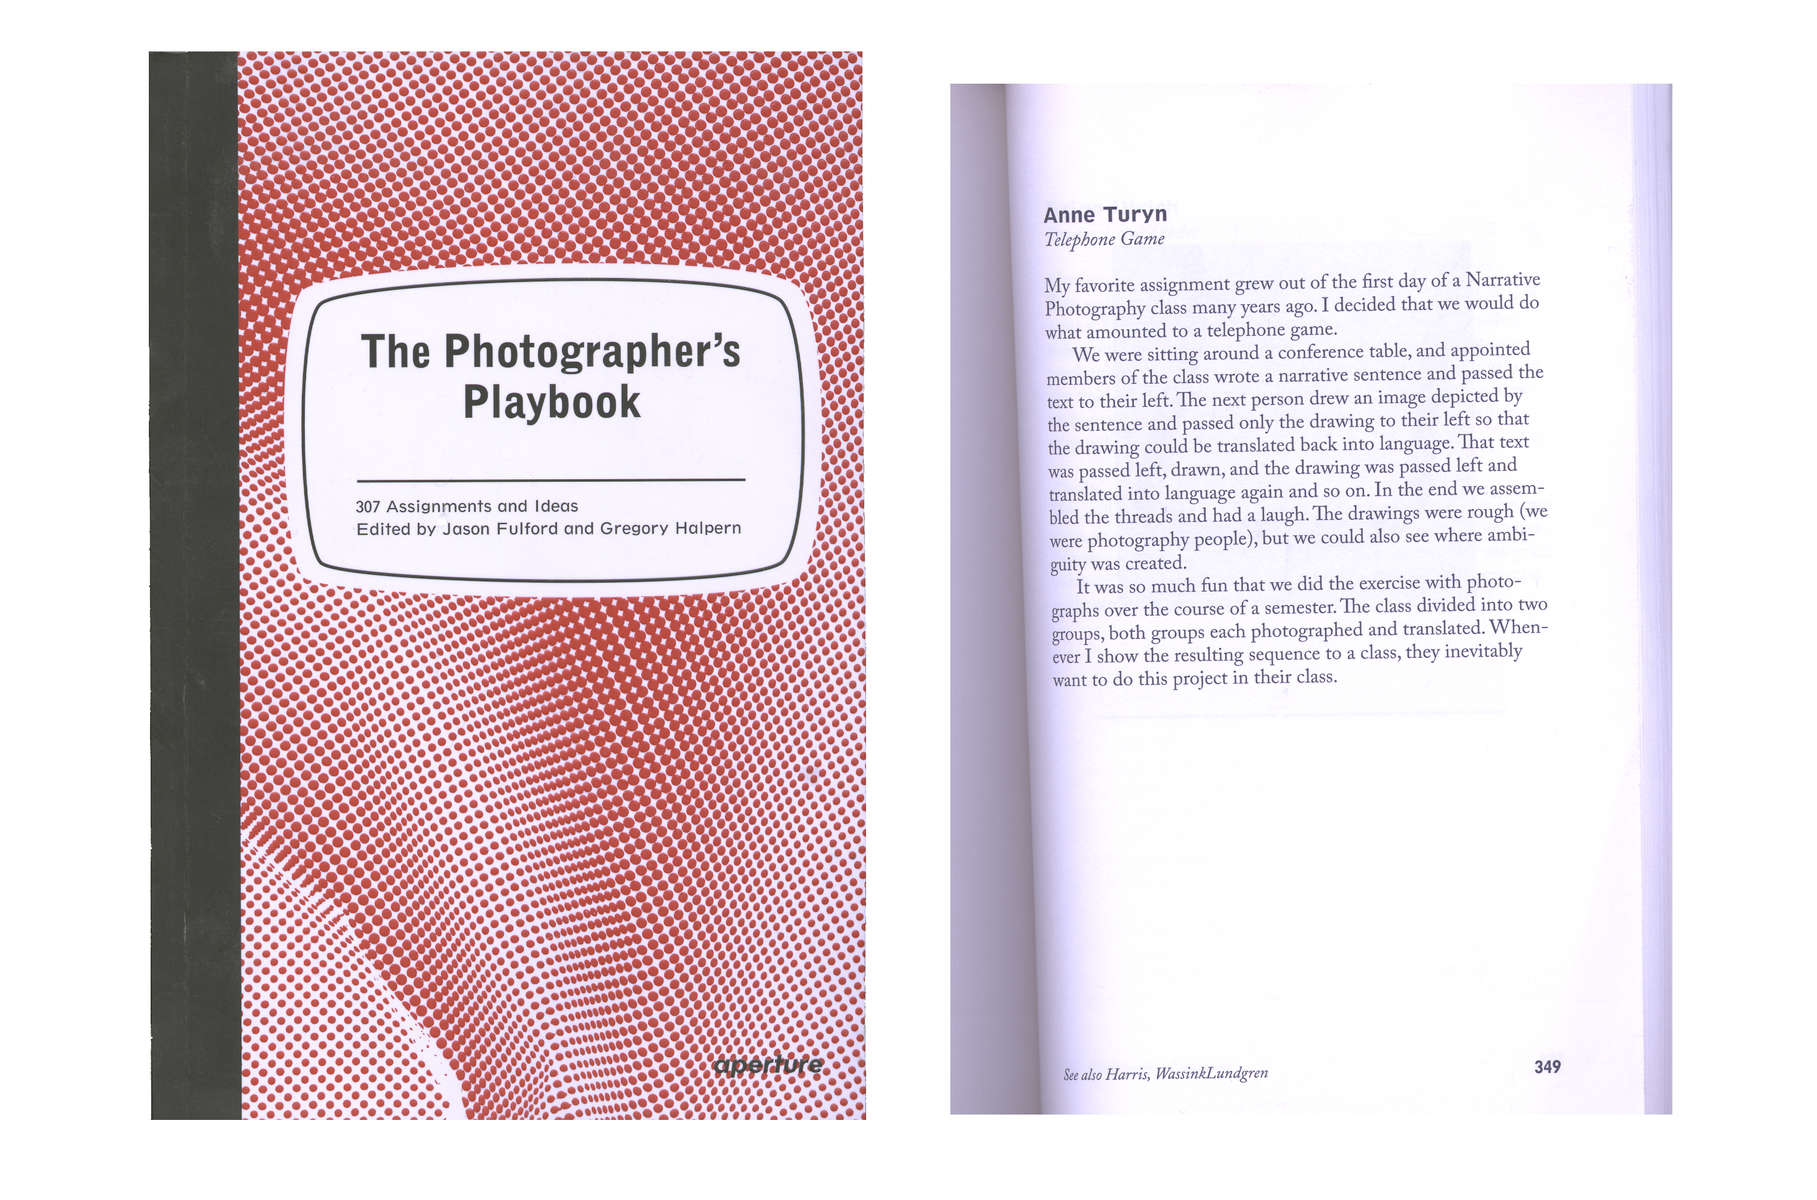 The Photographer's Playbook307 Assignments and Ideasedited by Jason Fulford and Gregory HalpernAperture, New York  2014Anne Turyn,  Telephone Game, page 349